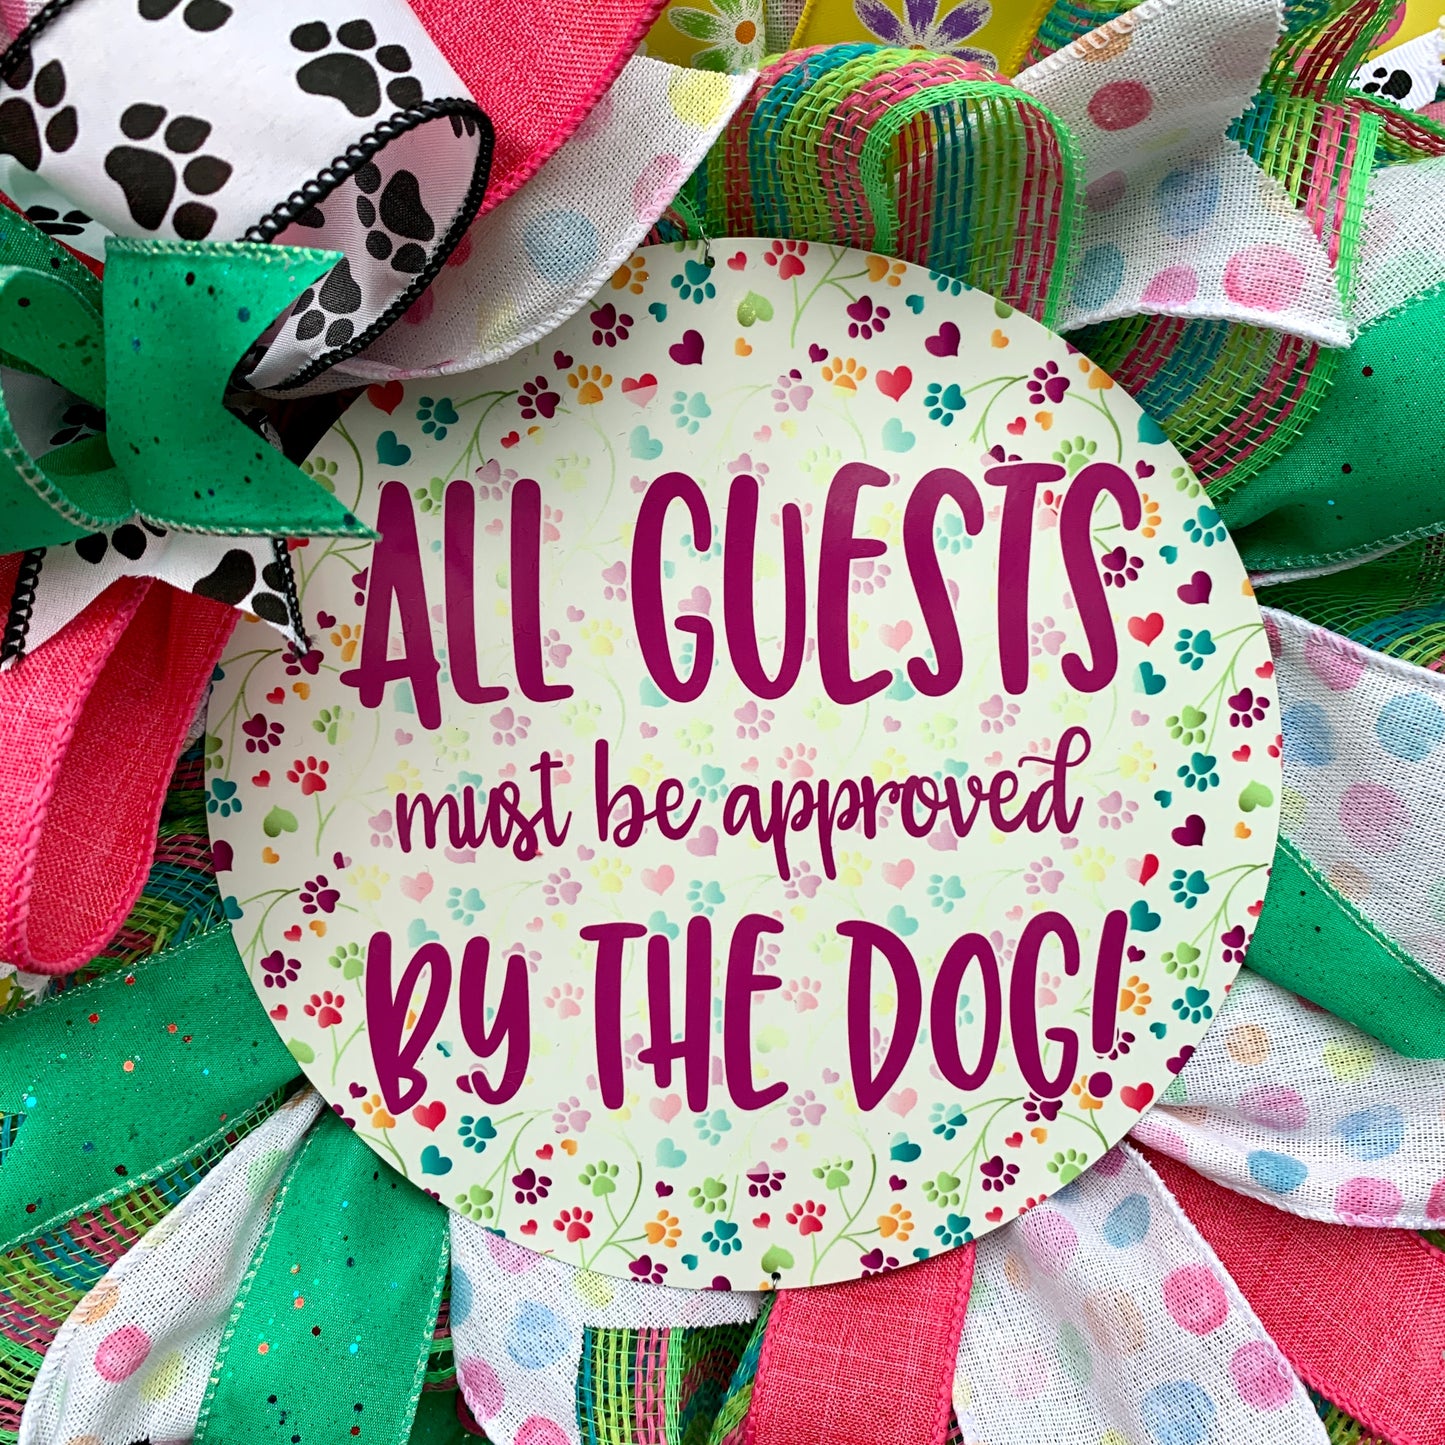 All Guests Must Be Approved By The Dog, Dog Wreath, Dog Decor, Dog Lover Wreath, Dog Paw Print Wreath, Dog Home Decor, Dog Door Hanger For Front Door